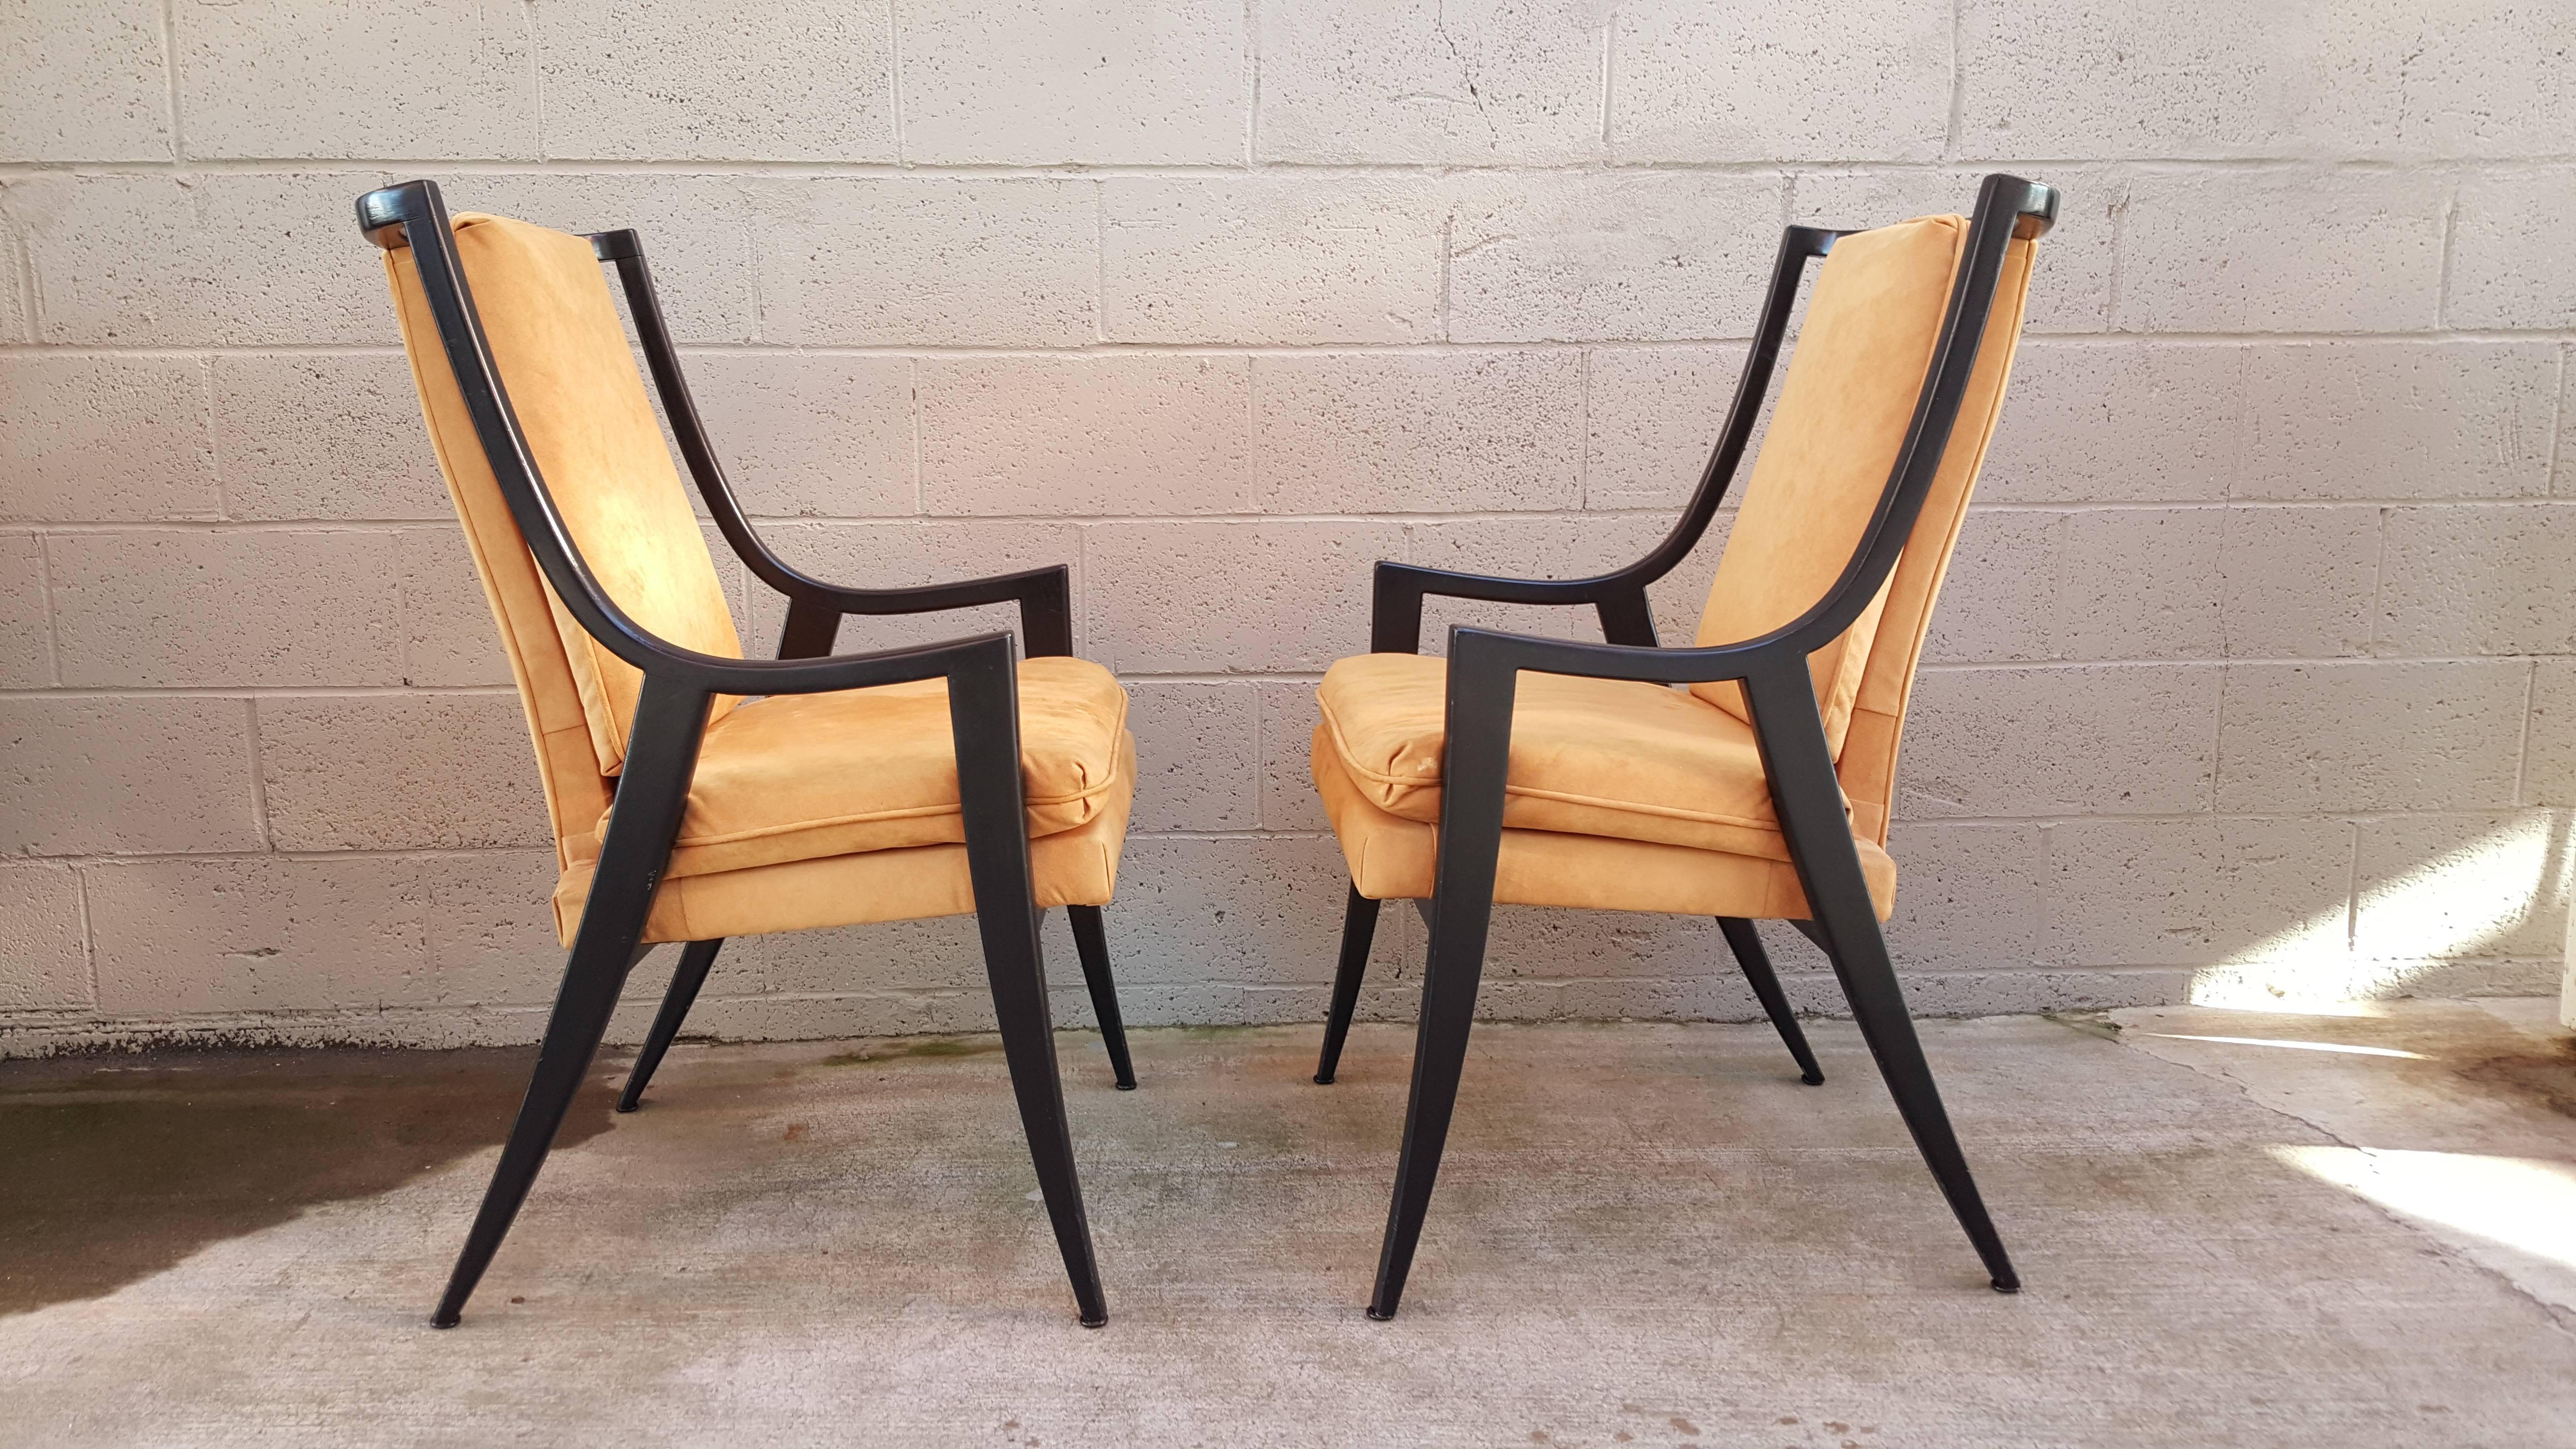 A striking set of six Mid-Century Modern dining chairs designed by Harvey Probber, circa 1950. Solid mahogany frames with original black painted finish. Older re-upholstery with a micro-suede fabric. Very good vintage condition. Multiple small